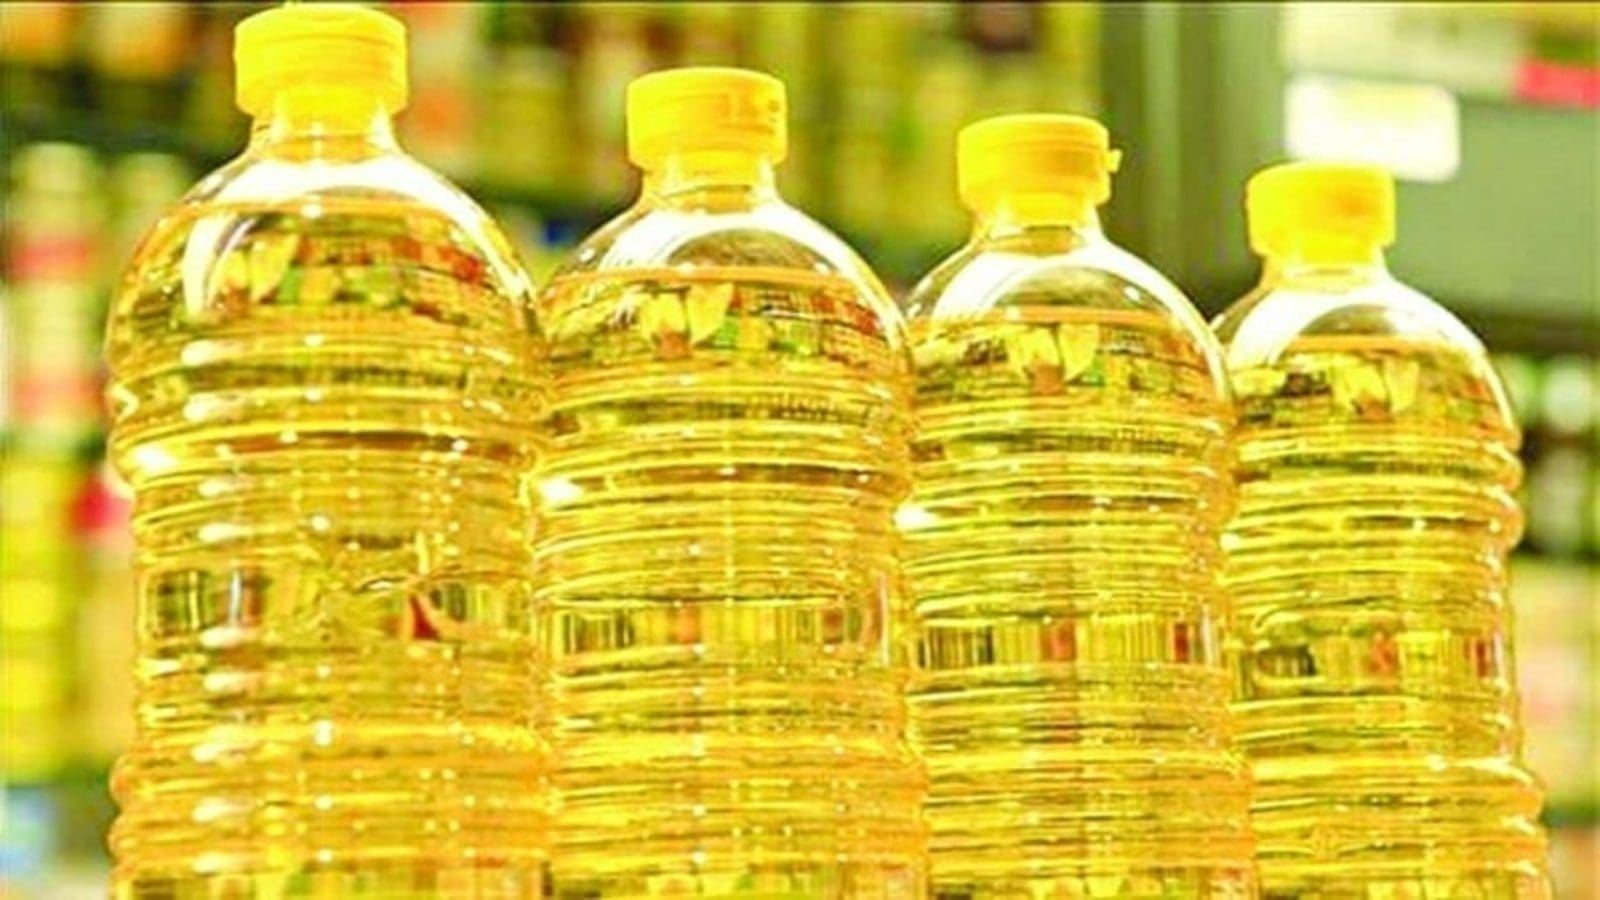 The Tanzania National Service targets to produce 1300 tonnes of sunflower and palm oil seeds to boost edible oil production